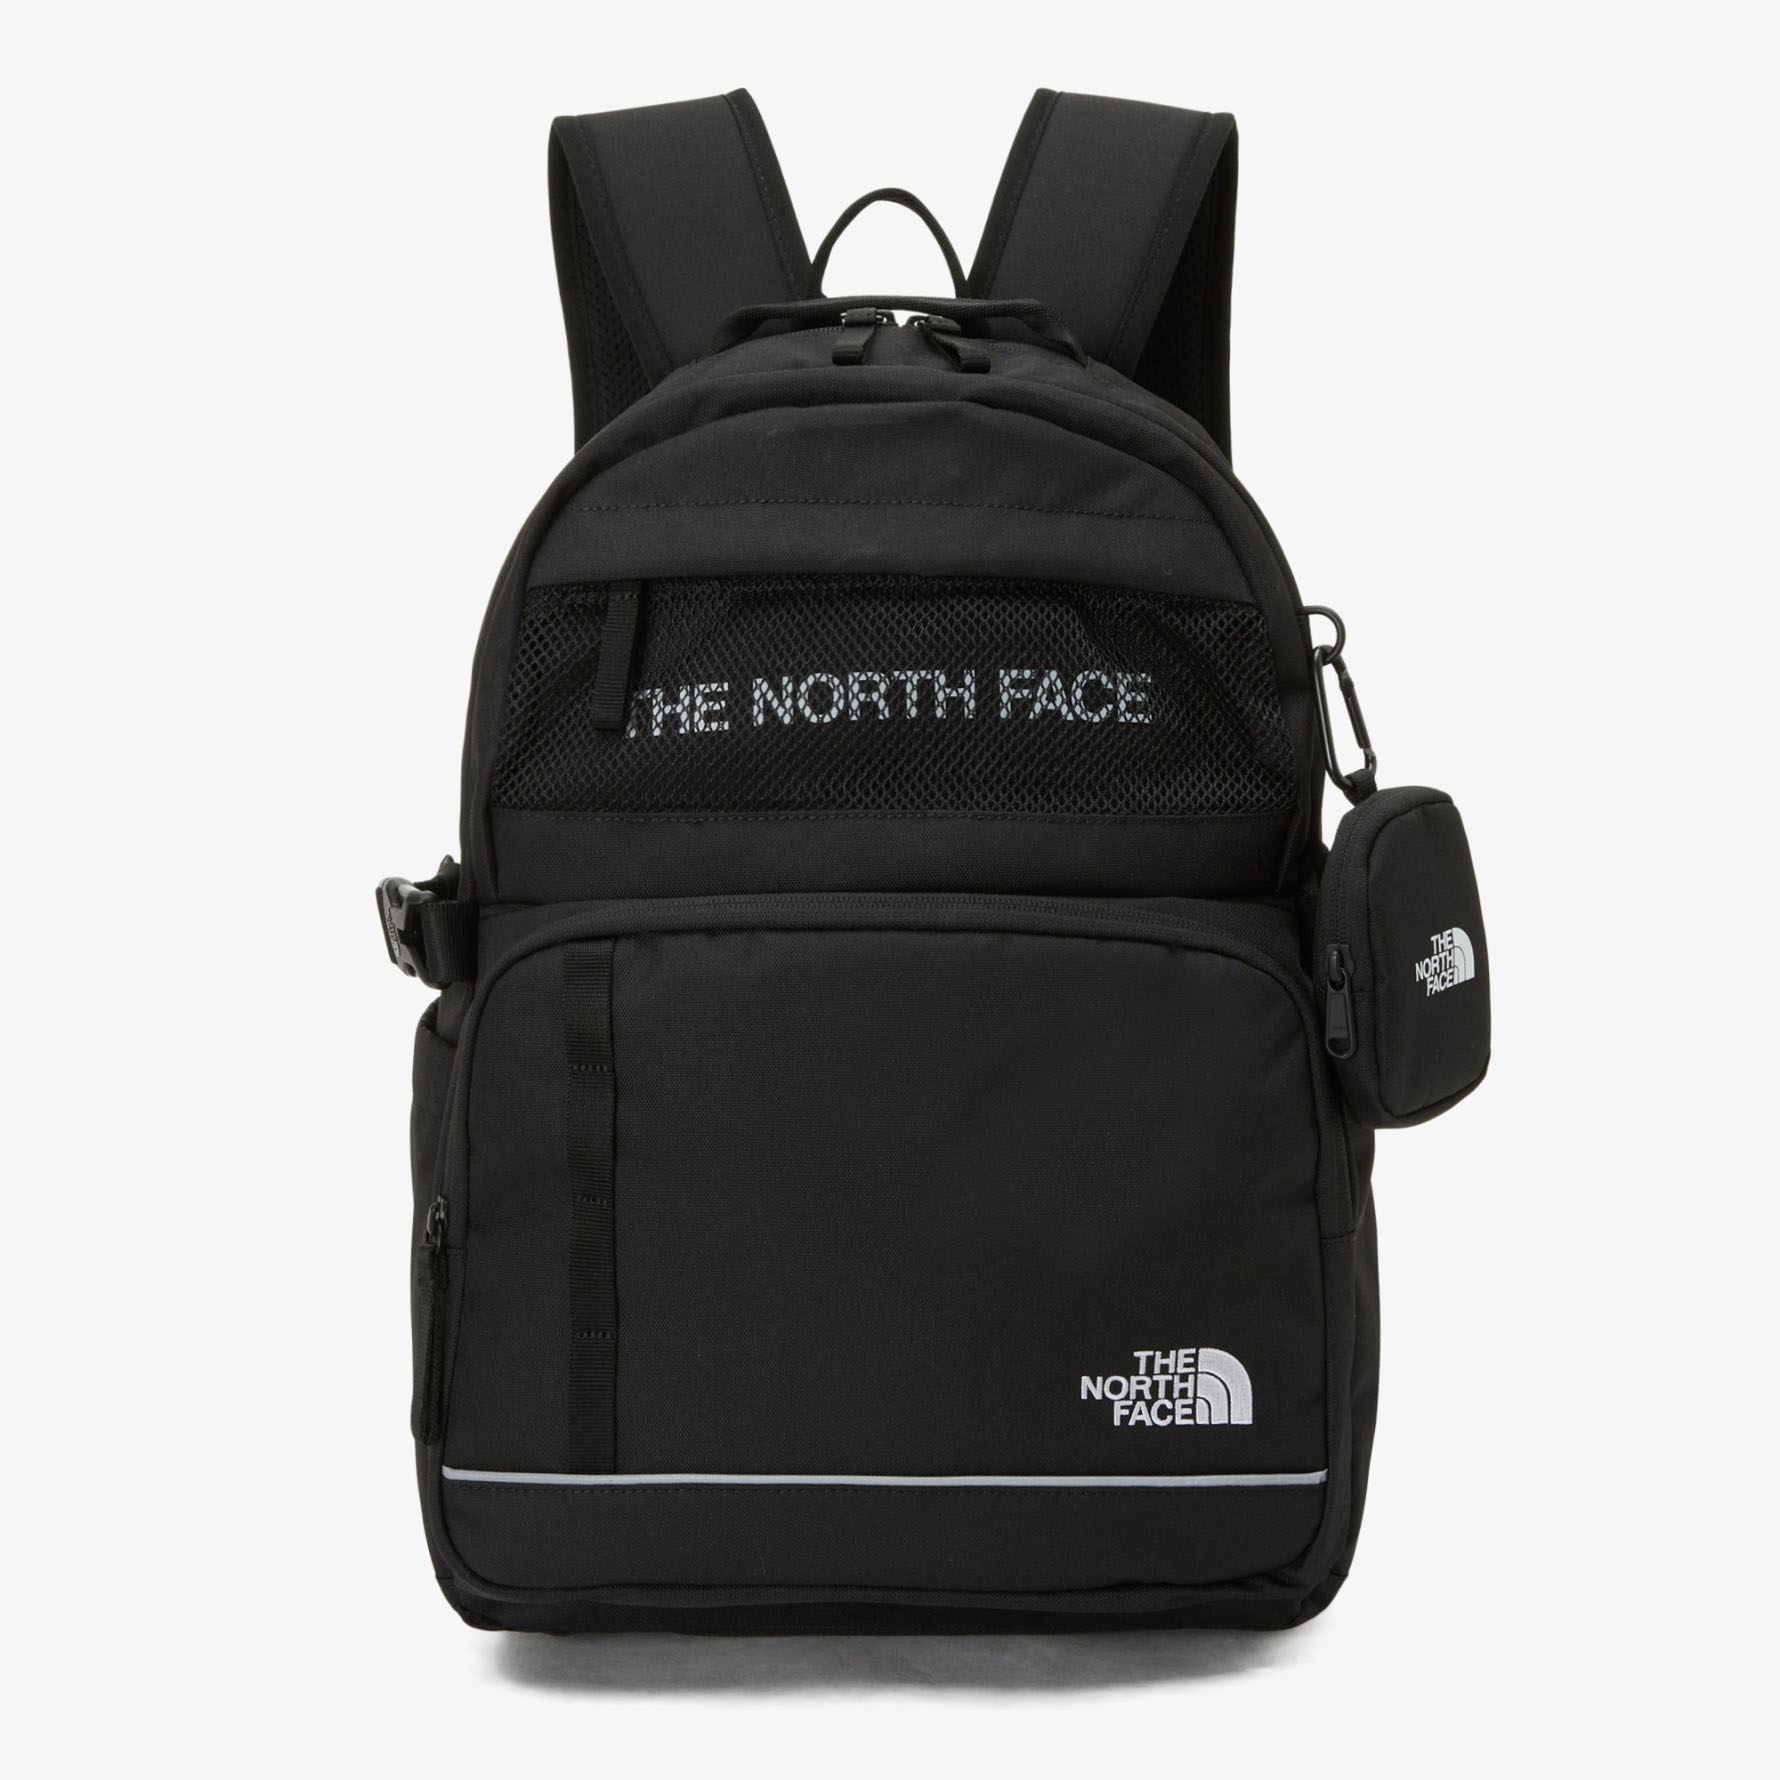 THE NORTH FACE キッズ ノースフェイス リュックサック Jr. SCHOOL PACK スクールバッグ 18リットル バックパック リュック CREAM BLACK キッズ用 NM2DP50S/R｜snkrs-aclo｜03